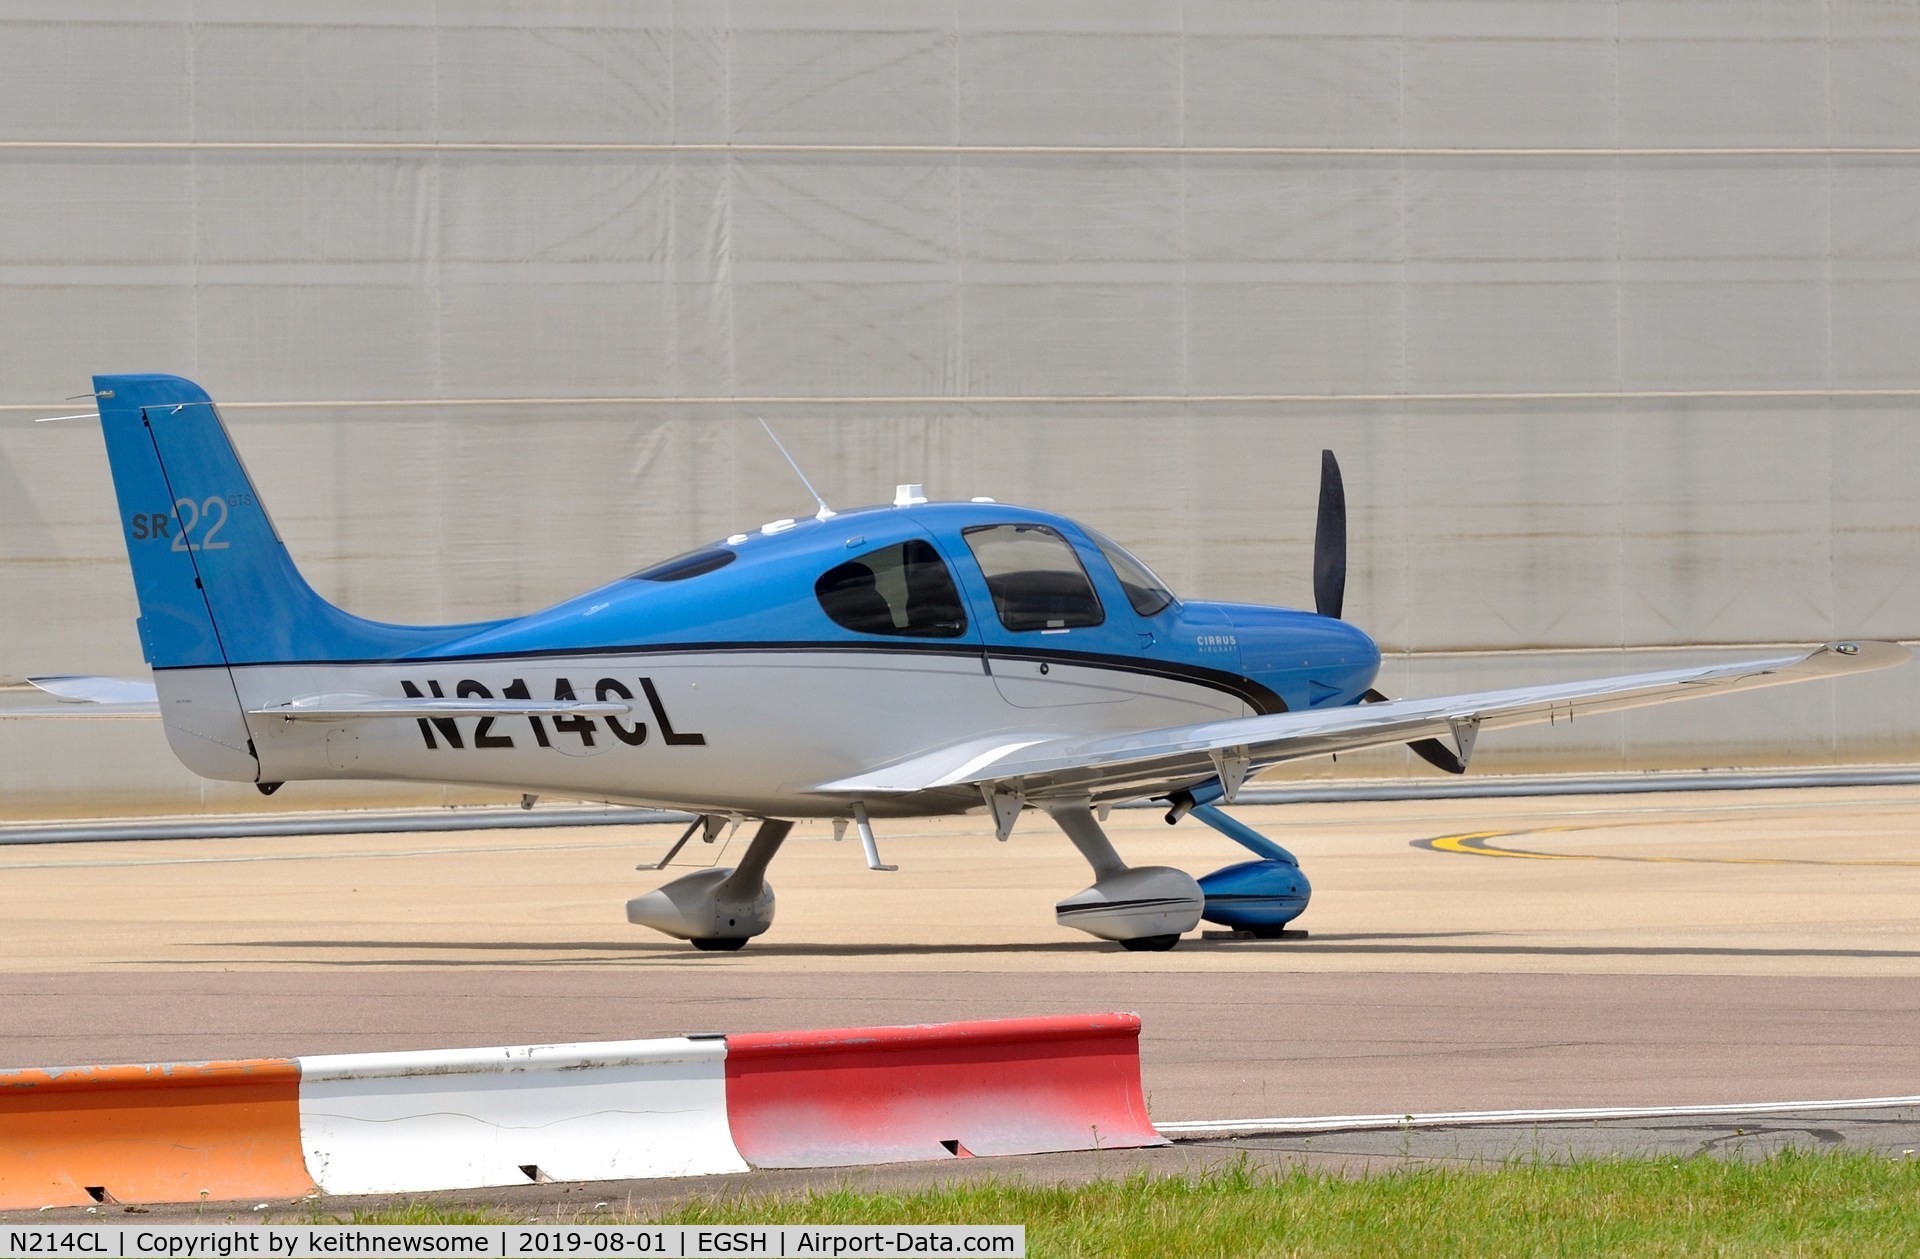 N214CL, 2012 Cirrus SR22 GTS C/N 3830, Nice visitor parked at Norwich.